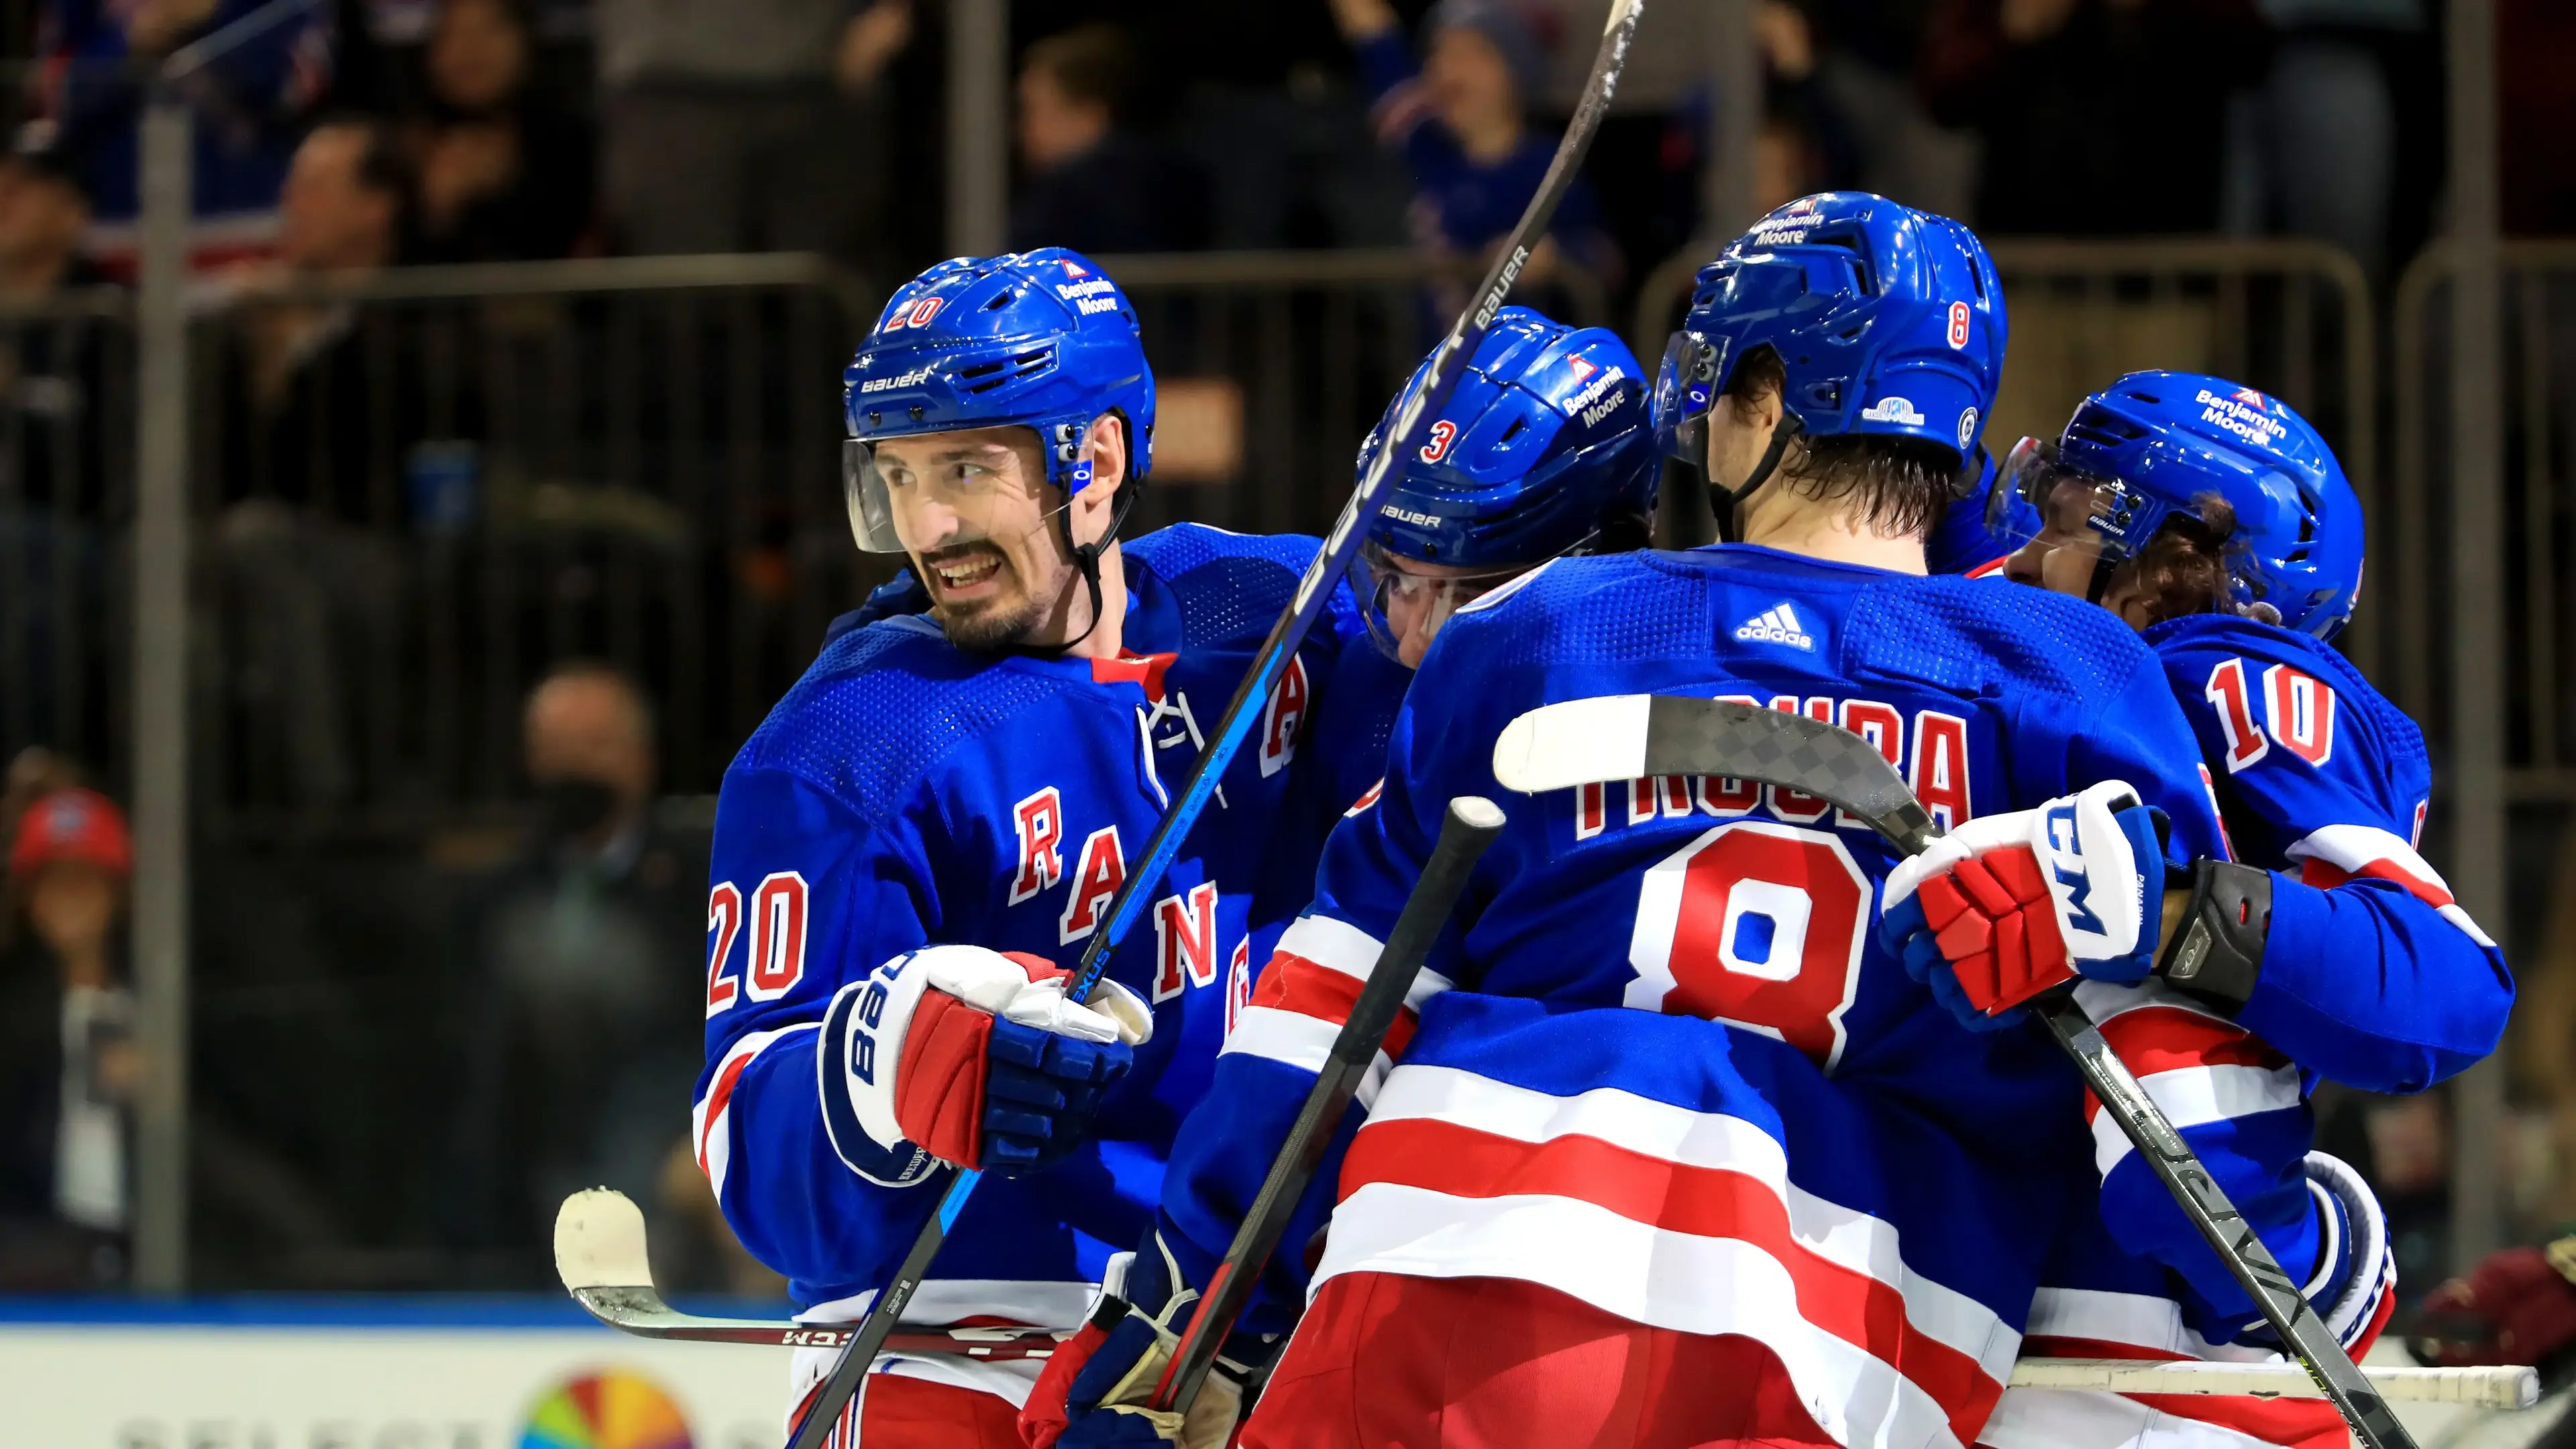 Jan 22, 2022; New York, New York, USA; New York Rangers left wing Chris Kreider (20) celebrates after scoring his NHL leading 28th goal during the second period against the Arizona Coyotes at Madison Square Garden. / Danny Wild-USA TODAY Sports